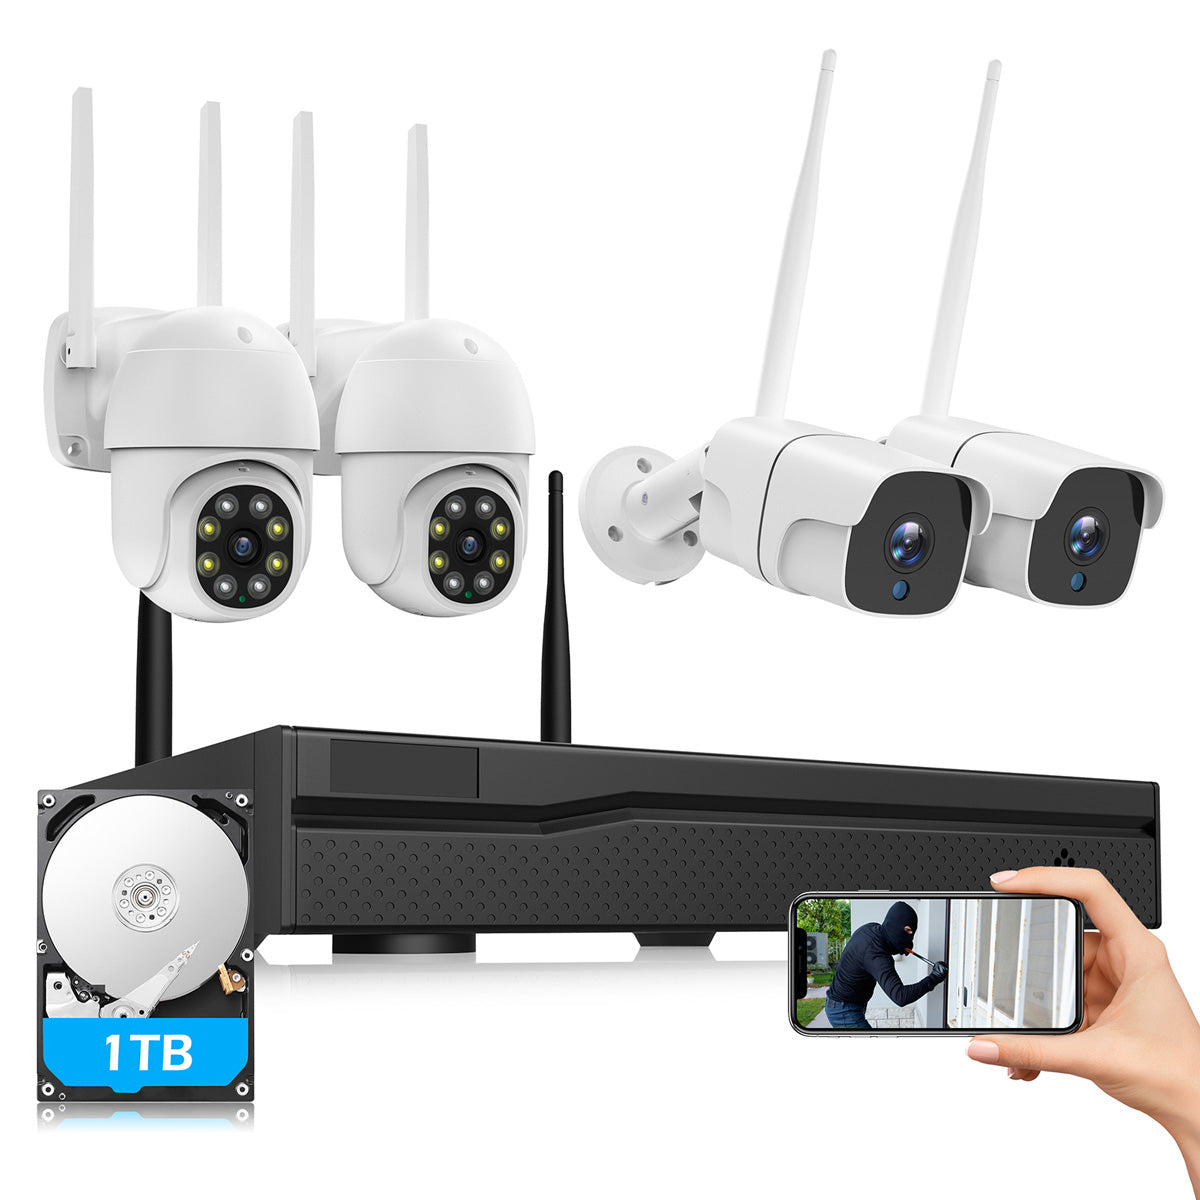 Toguard W310 Wireless Home Security Camera System Outdoor PTZ Cameras and Bullet Cameras